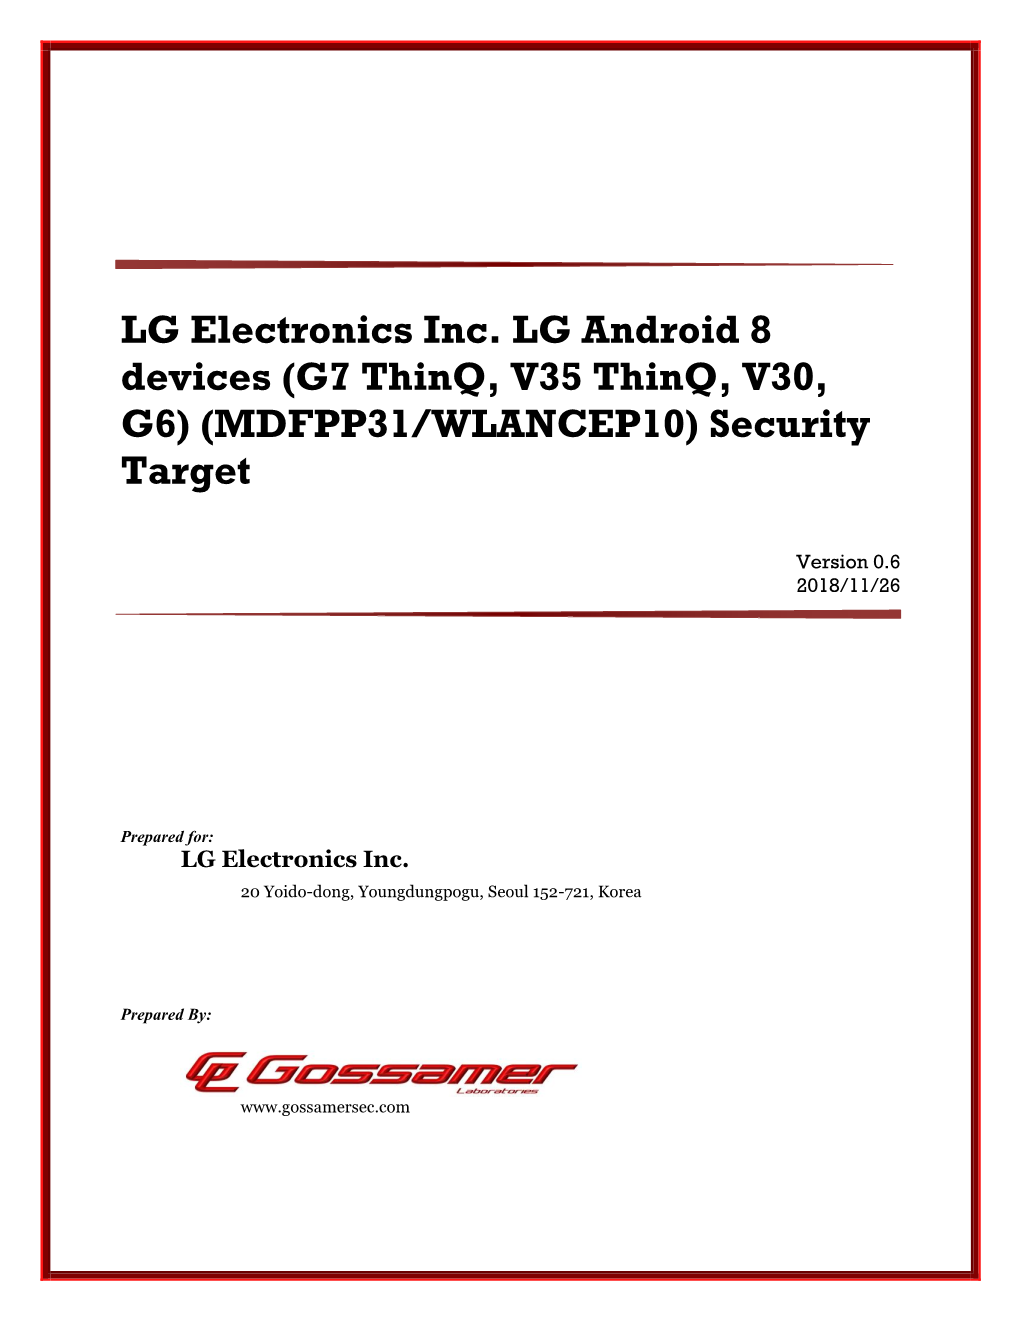 LG Electronics Inc. LG Android 8 Devices (G7 Thinq, V35 Thinq, V30, G6) (MDFPP31/WLANCEP10) Security Target